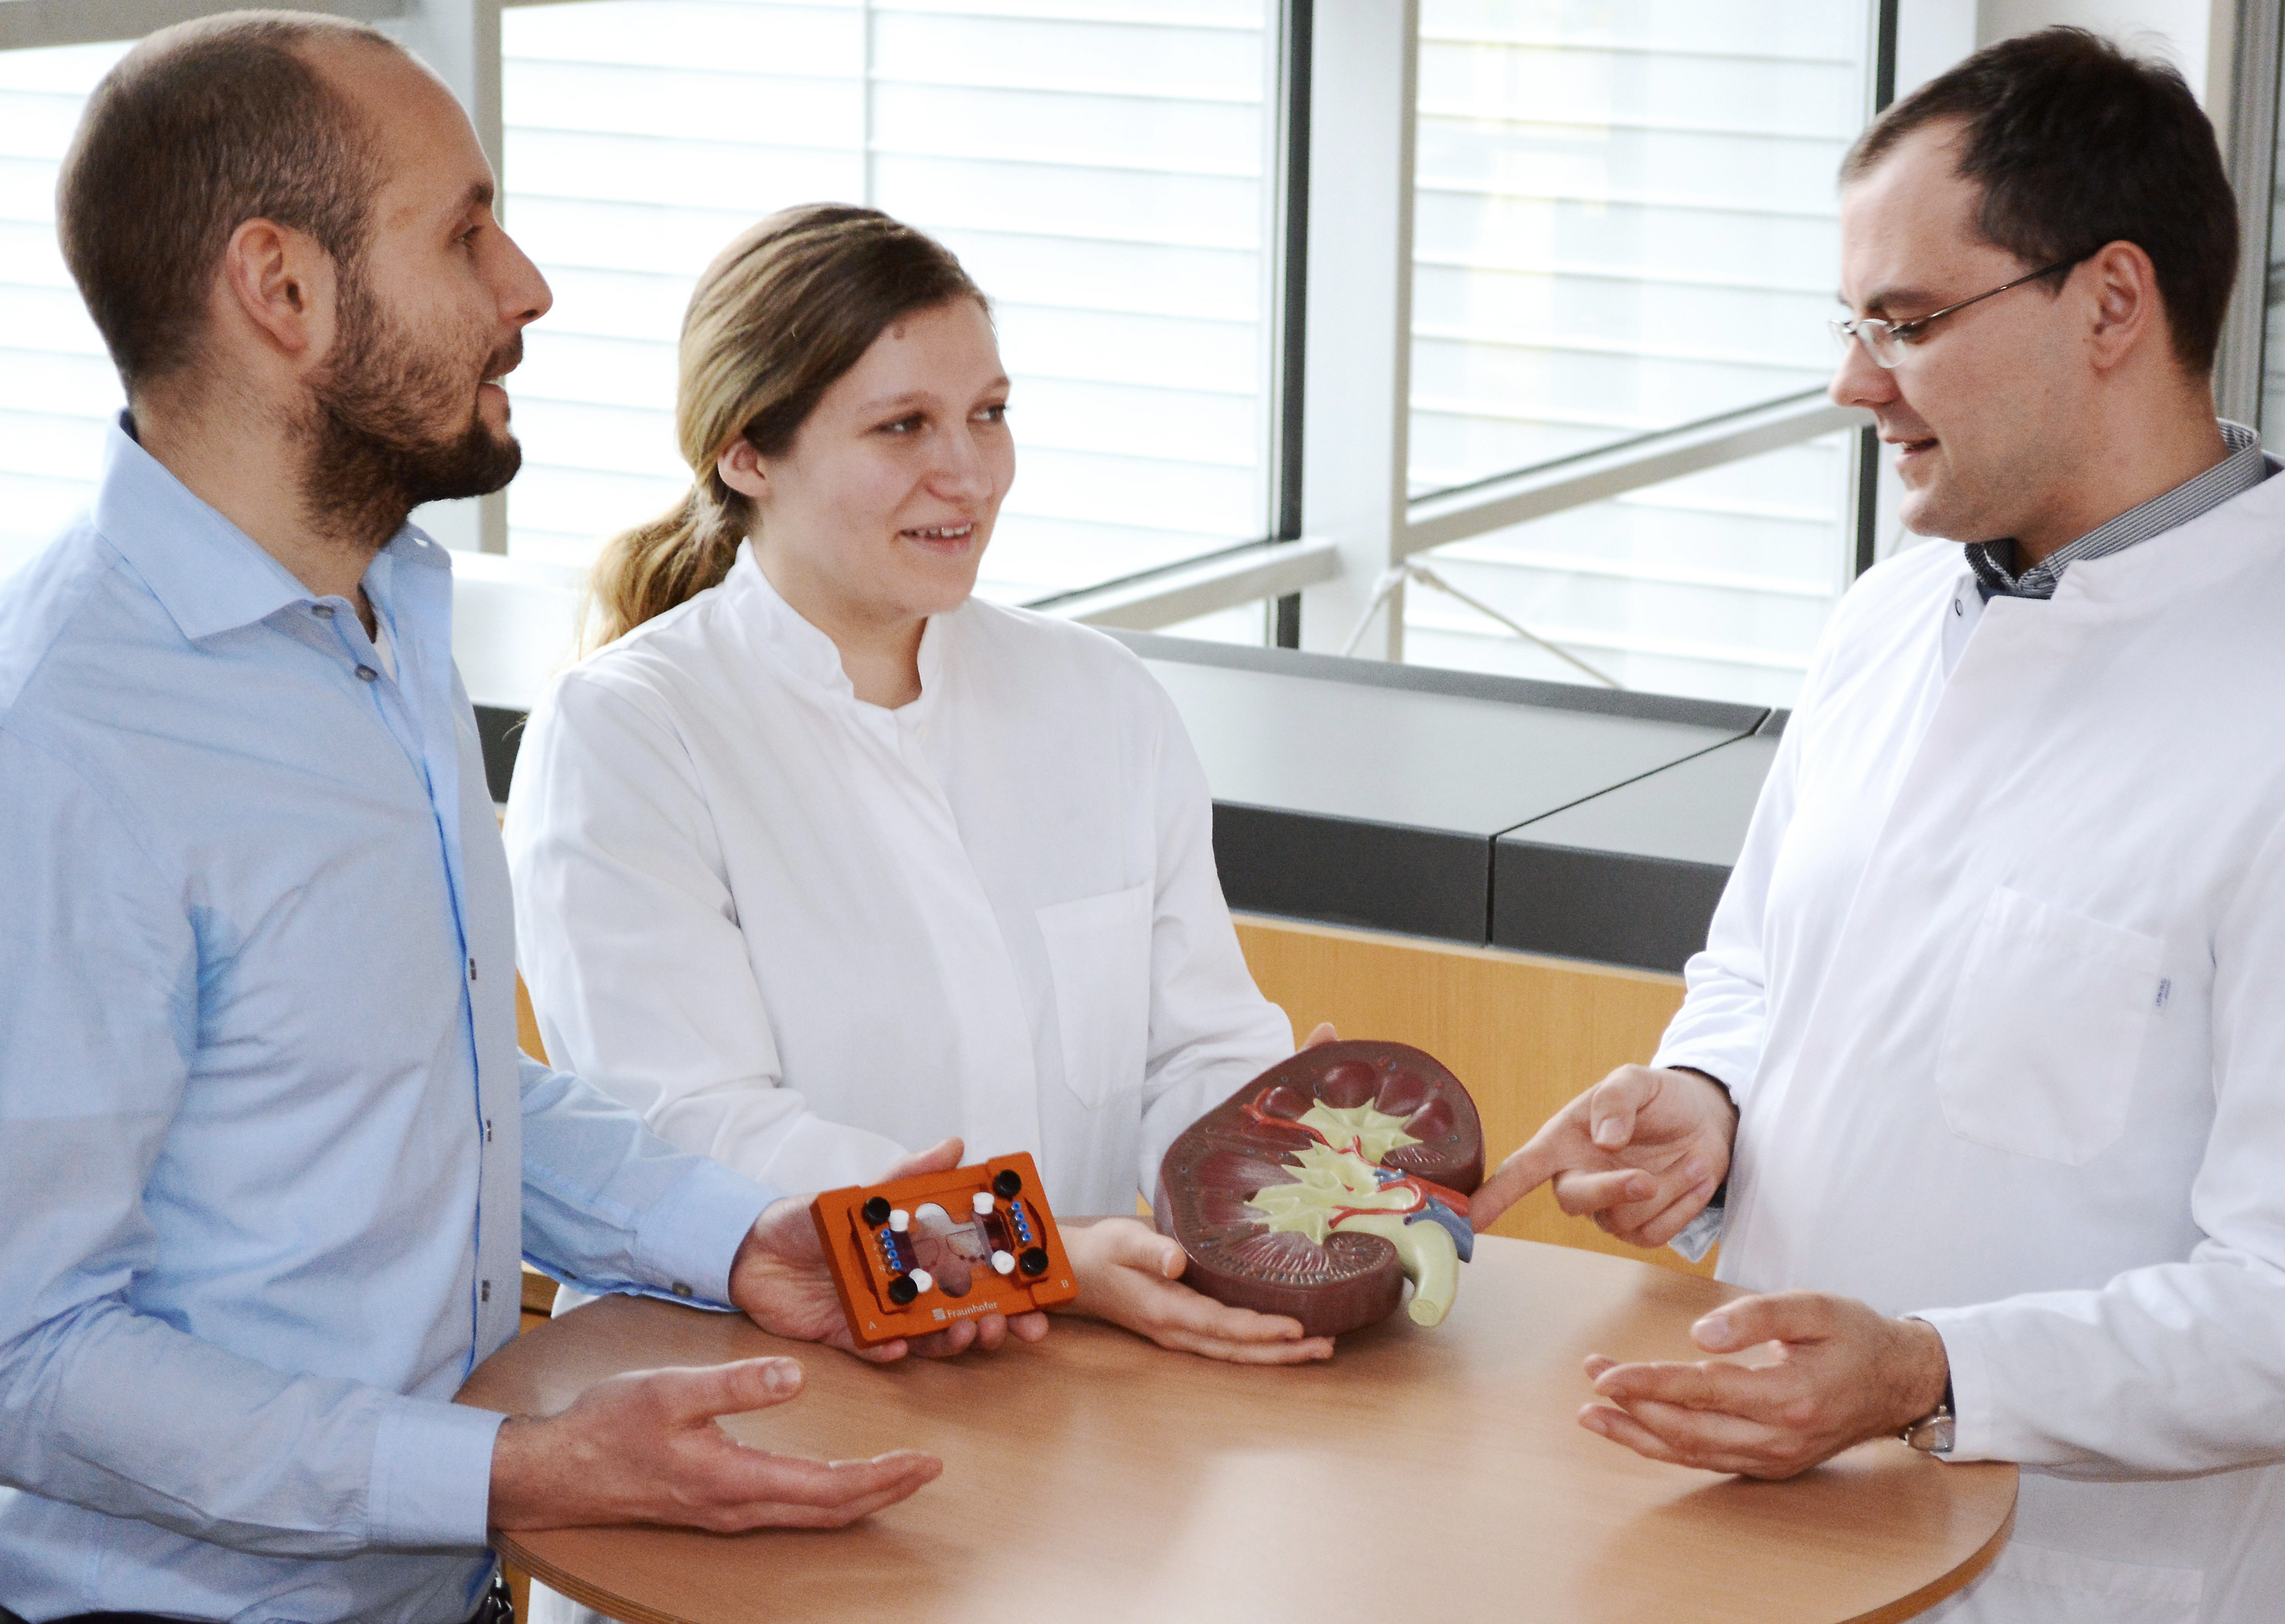 Florian Schmieder, Deborah Förster and Jan Sradnick (from left to right) are developing a microphysiological model of the kidney. As a result, they are creating the basis for artificial kidney replacement from patient’s own cells.